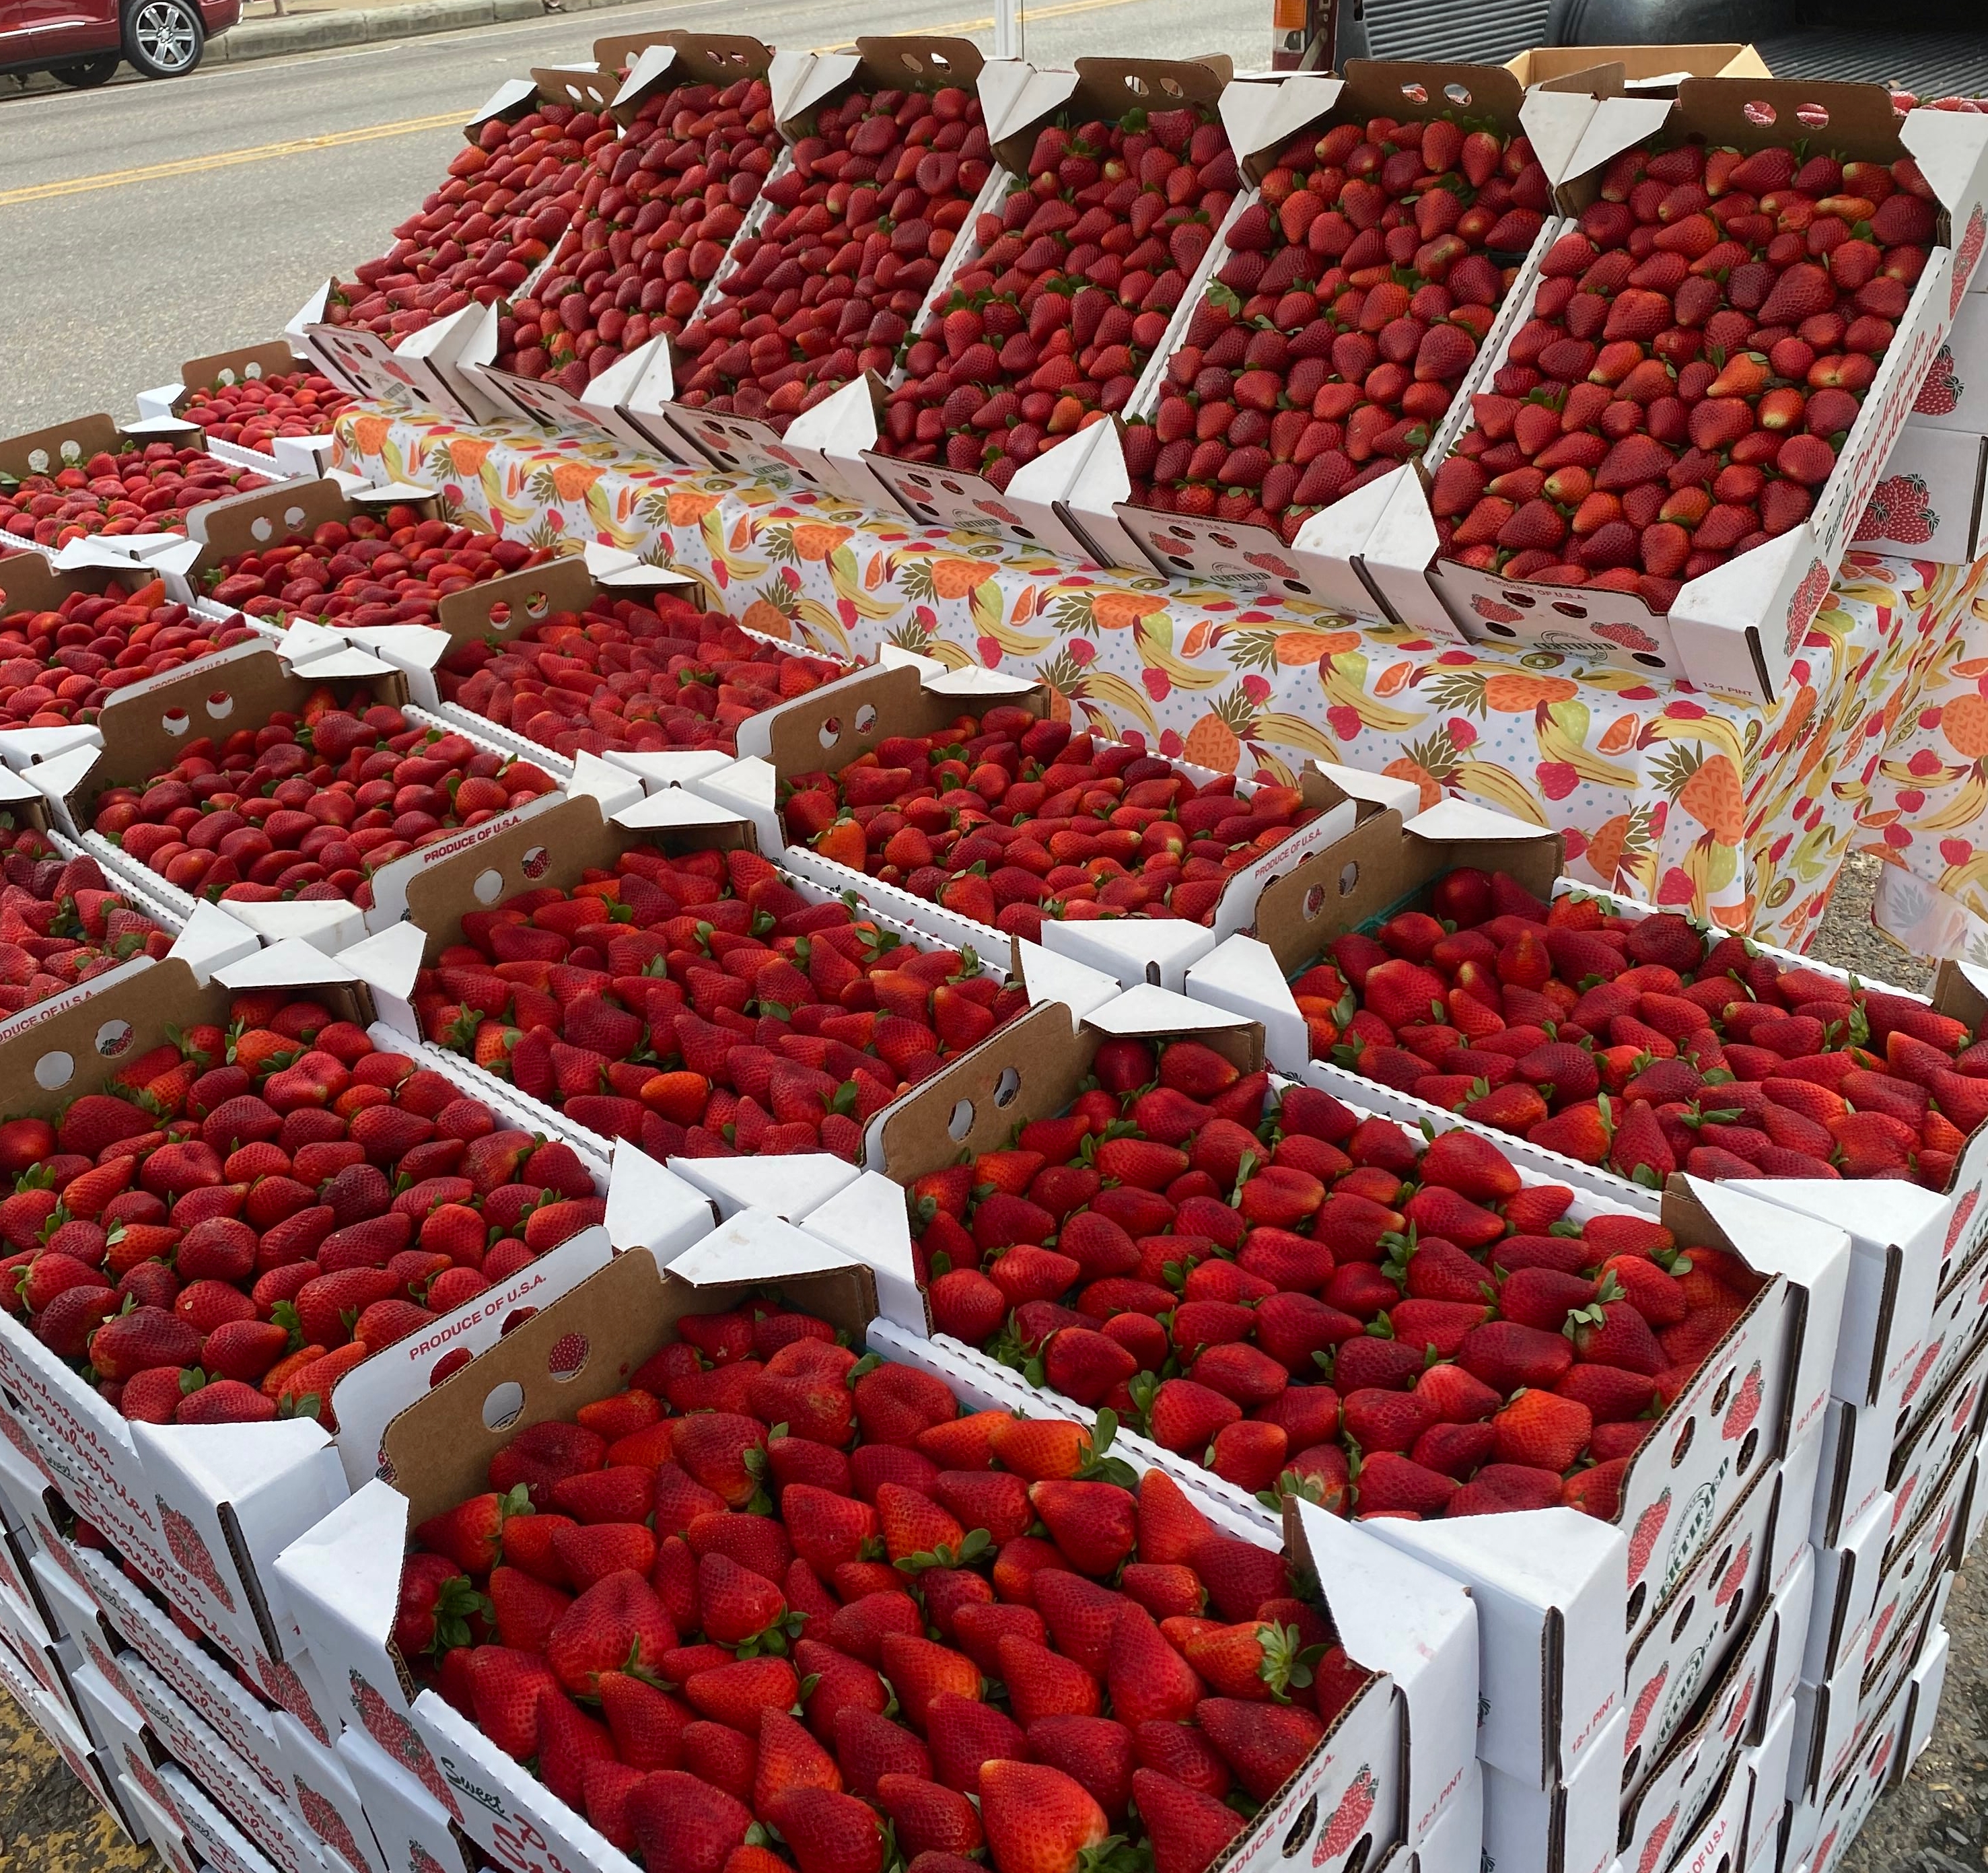 Ponchatoula ready for its 50th Strawberry Festival after 2-year absence